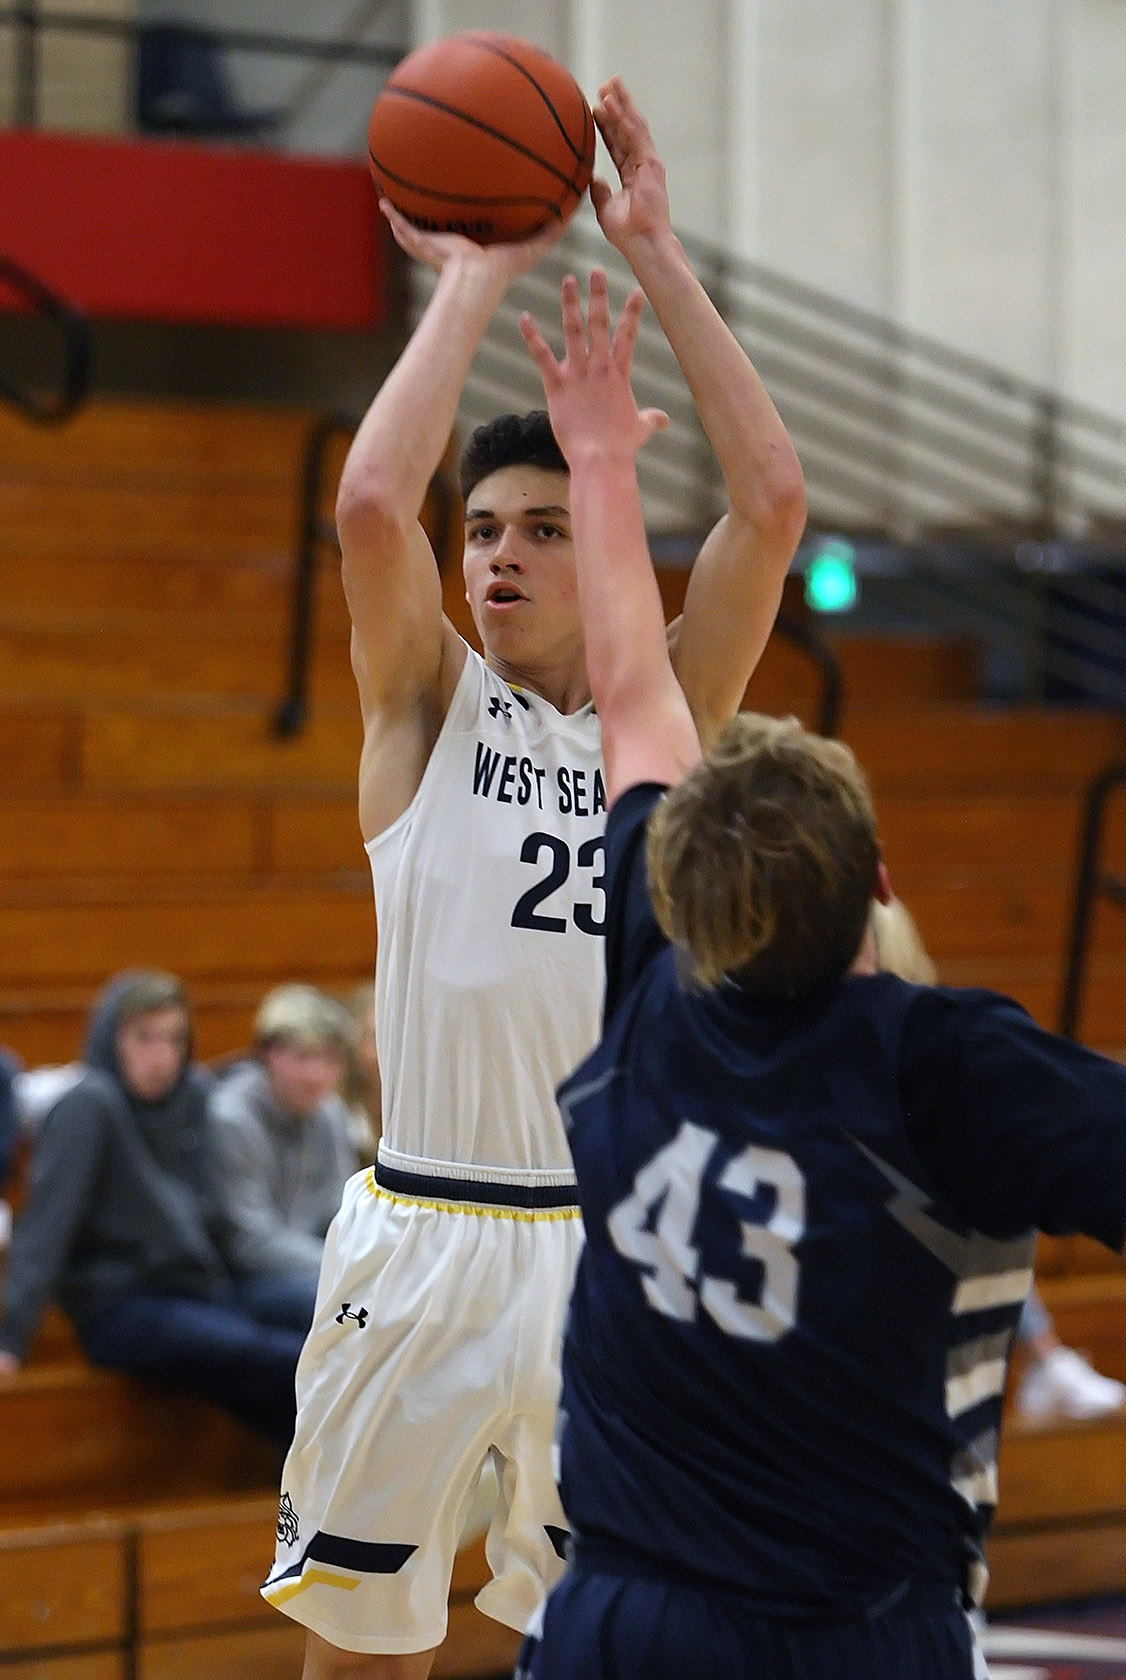 Anthony Giomi of West Seattle puts up a shot against Squalicum's Kendall Engelhart.